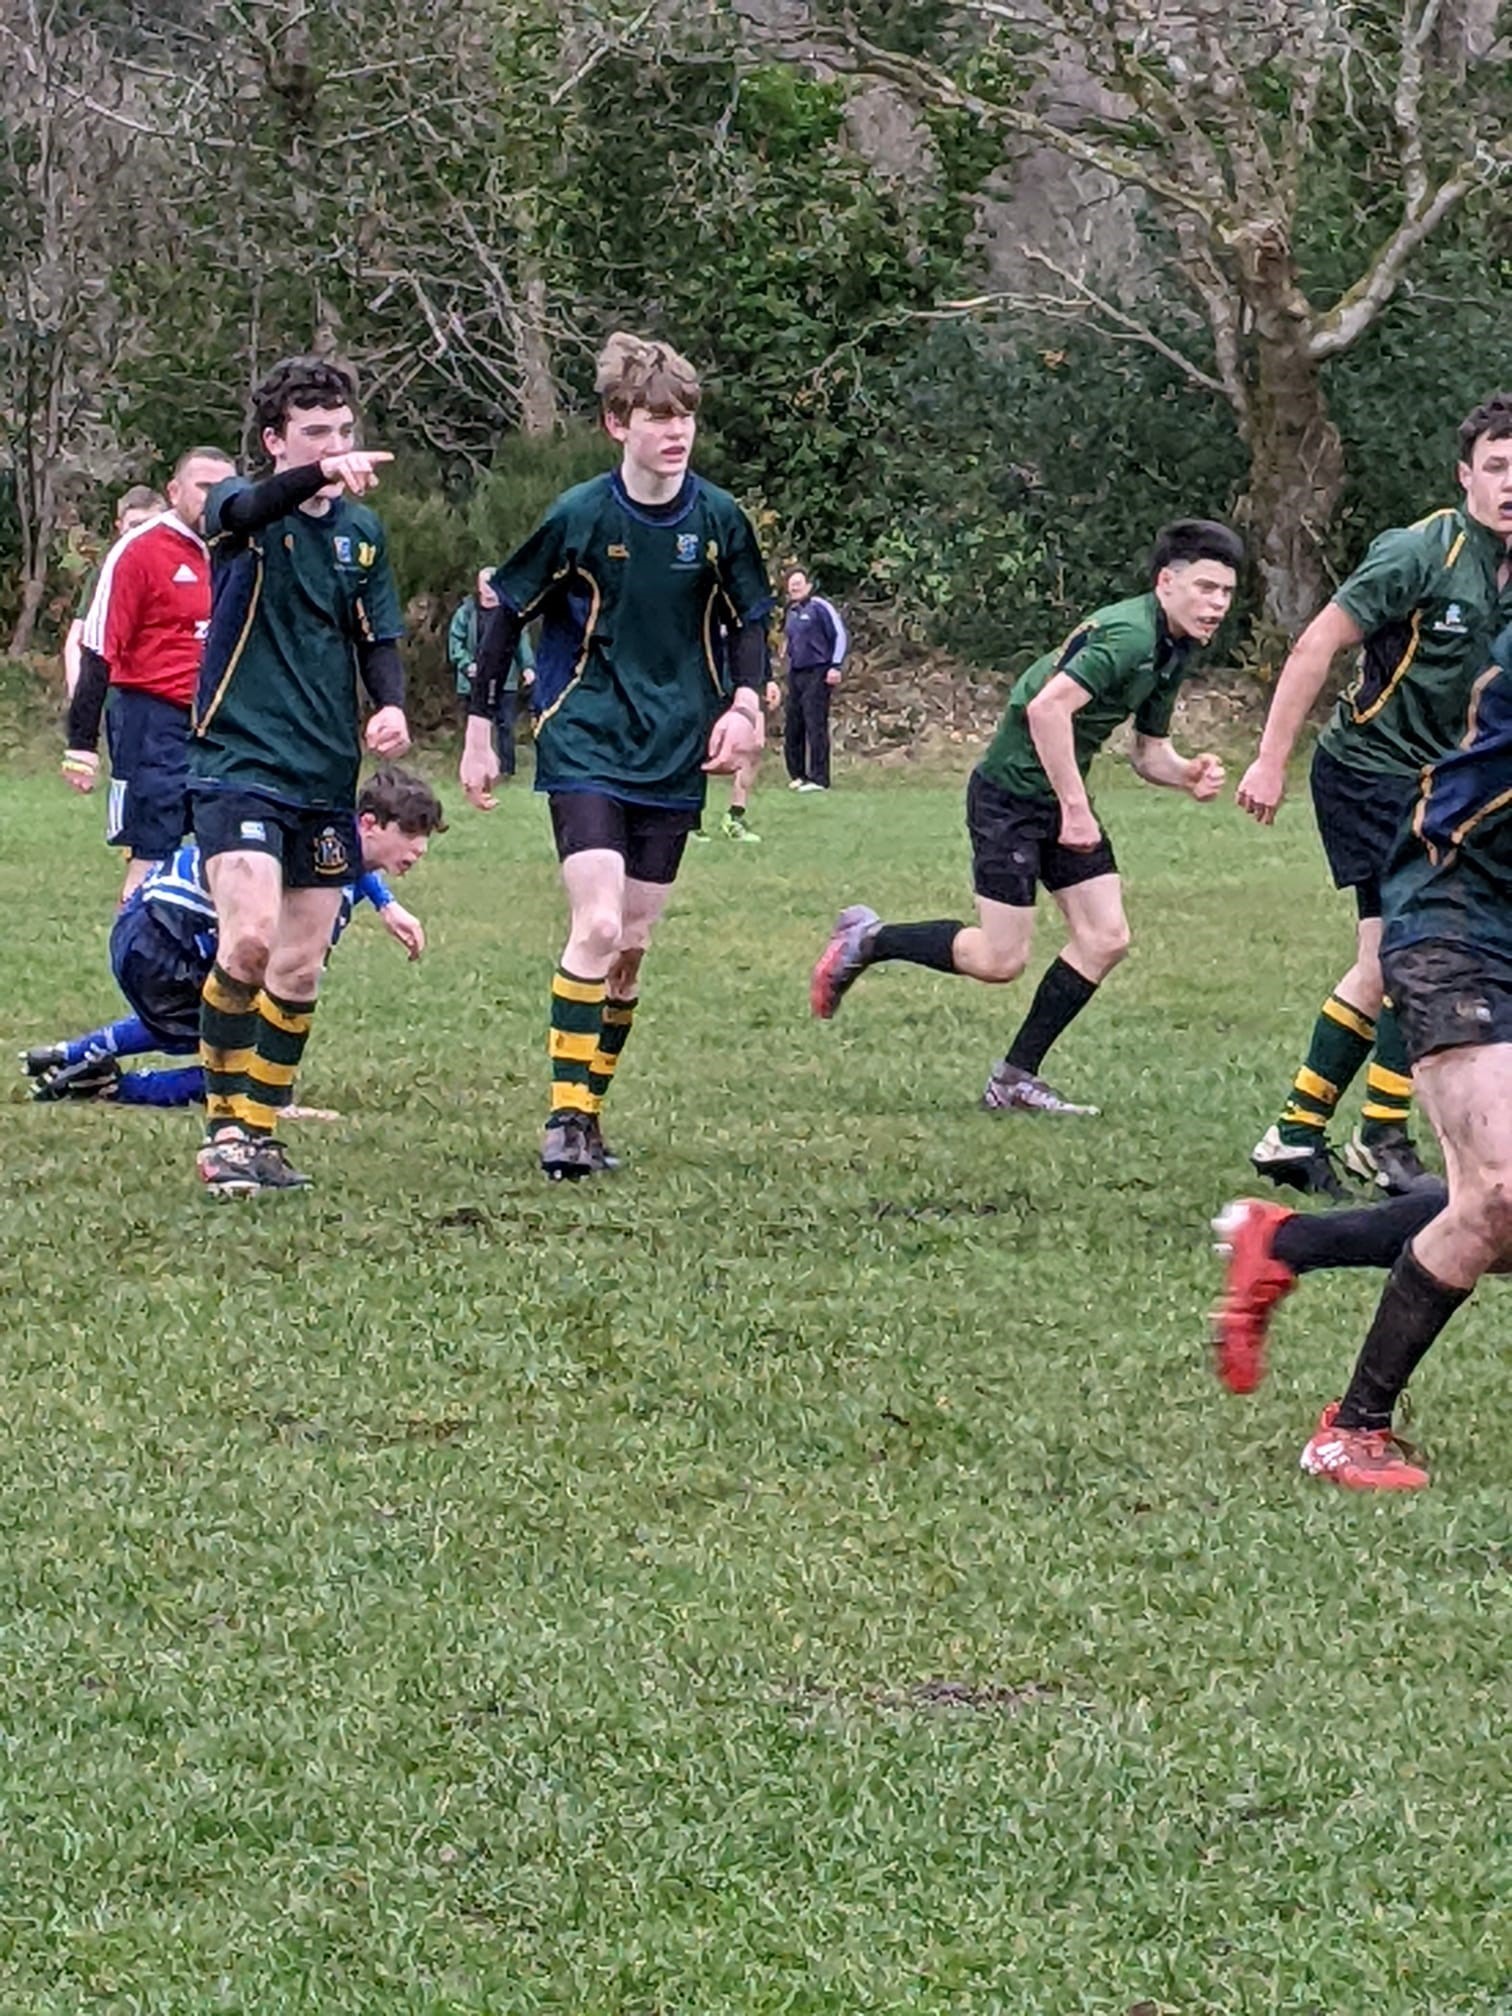 Helensburgh Rugby Clubs under-15s in action against Whitecraigs at Ardencaple